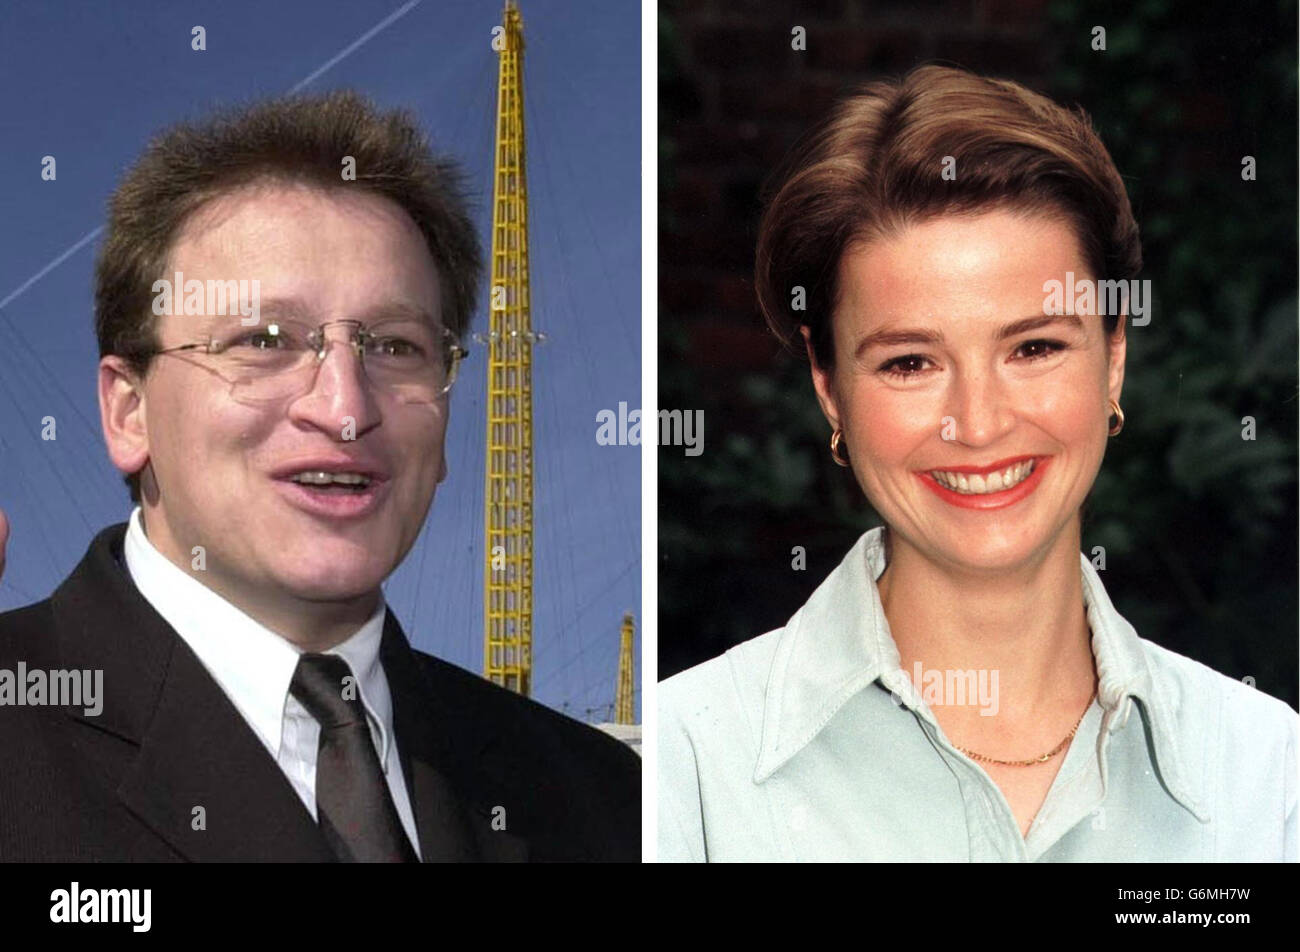 Composite Picture of former Millennium Dome boss PY Gerbeau who is to marry BBC newsreader Kate Sanderson (right), it was announced. The couple became engaged over the festive season after he popped the question as they holidayed in Dubai. Charismatic Gerbeau - who became the face of the troubled Dome - and Sanderson, who reads bulletins on BBC Breakfast, have not fixed a date for the wedding. Stock Photo